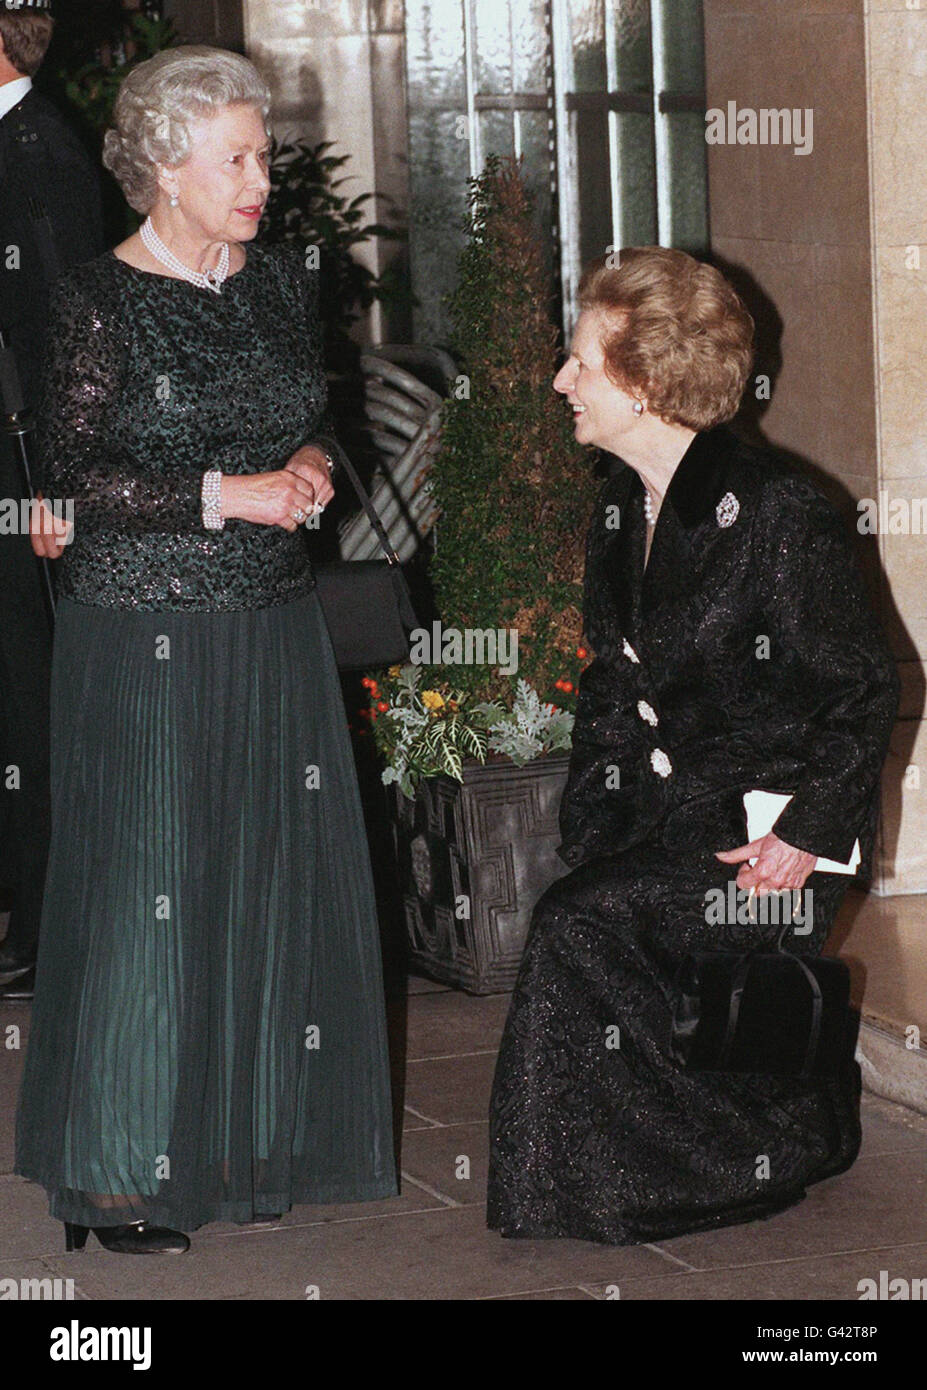 Baroness Thatcher curtsies to the Queen on her arrival at Claridge's in London for a glittering dinner last night (Monday) to celebrate the former Prime Minister's 70th birthday Baroness Thatcher greeted the Queen warmly, laying to rest past speculation that the two women did not get on with each other. See PA Story ROYAL Thatcher. Photo by David Cheskin/PA 07/03/98: The traditional curtsey could soon disappear, in a round of reforms to further modernise the monarchy, announced today (Saturday). The proposals include restricting the style His or Her Royal Highness to senior royals; confirming Stock Photo